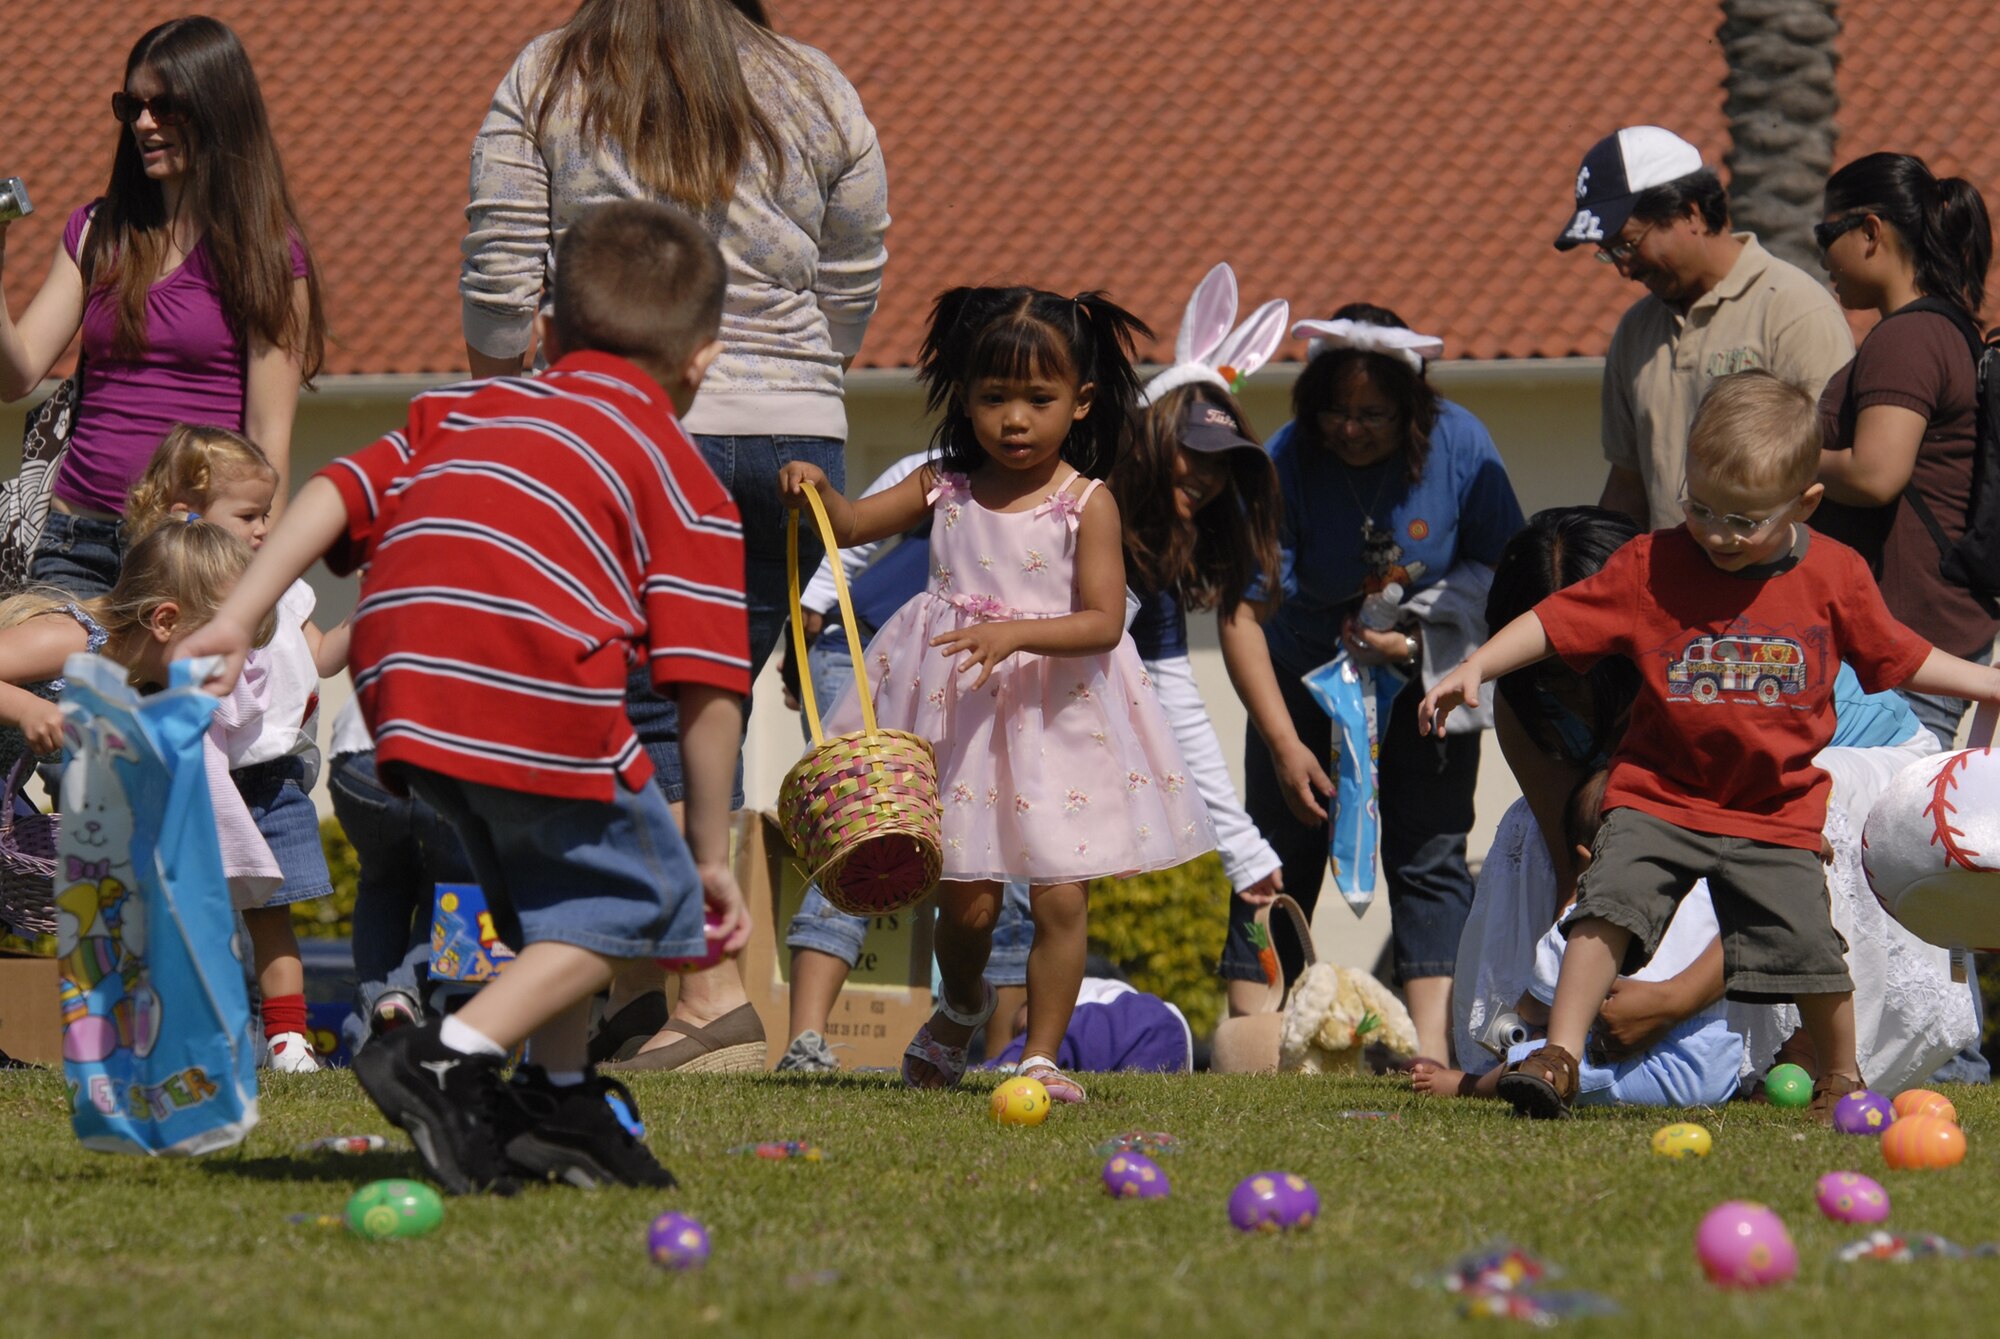 Children scramble for Easter eggs during the annual egg hunt on Fort MacArthur, March 22. A petting zoo, magic show, Easter egg hunt and visit from the Easter Bunny were all part of the festivities. (Photo by Joe Juarez)